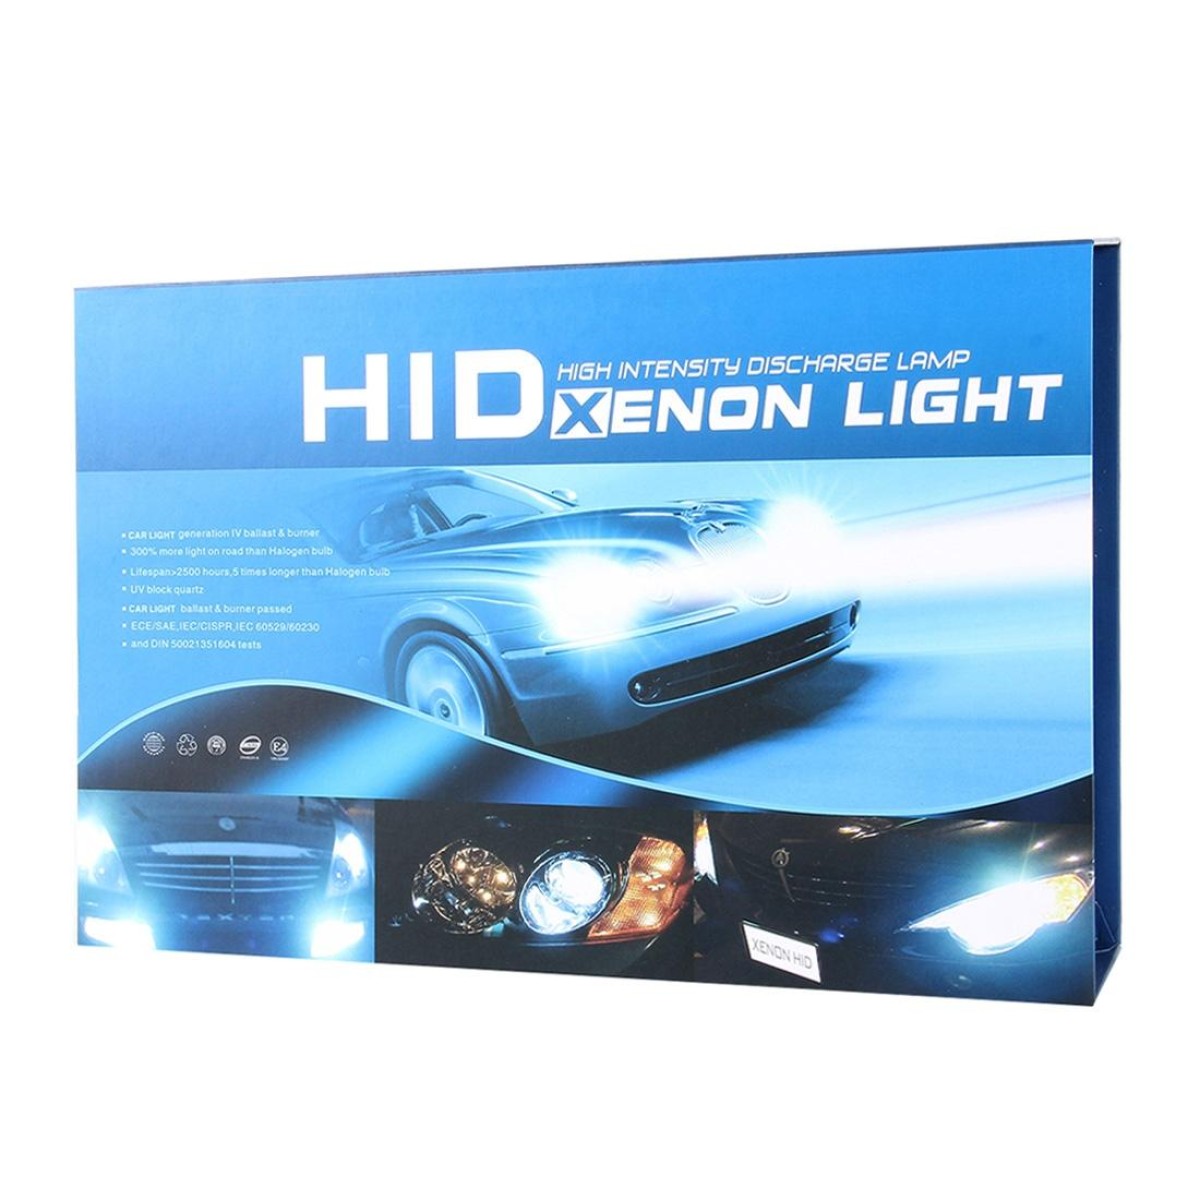 DC12V 35W 2x H7 Slim HID Xenon Light, High Intensity Discharge Lamp, Color Temperature: 8000K